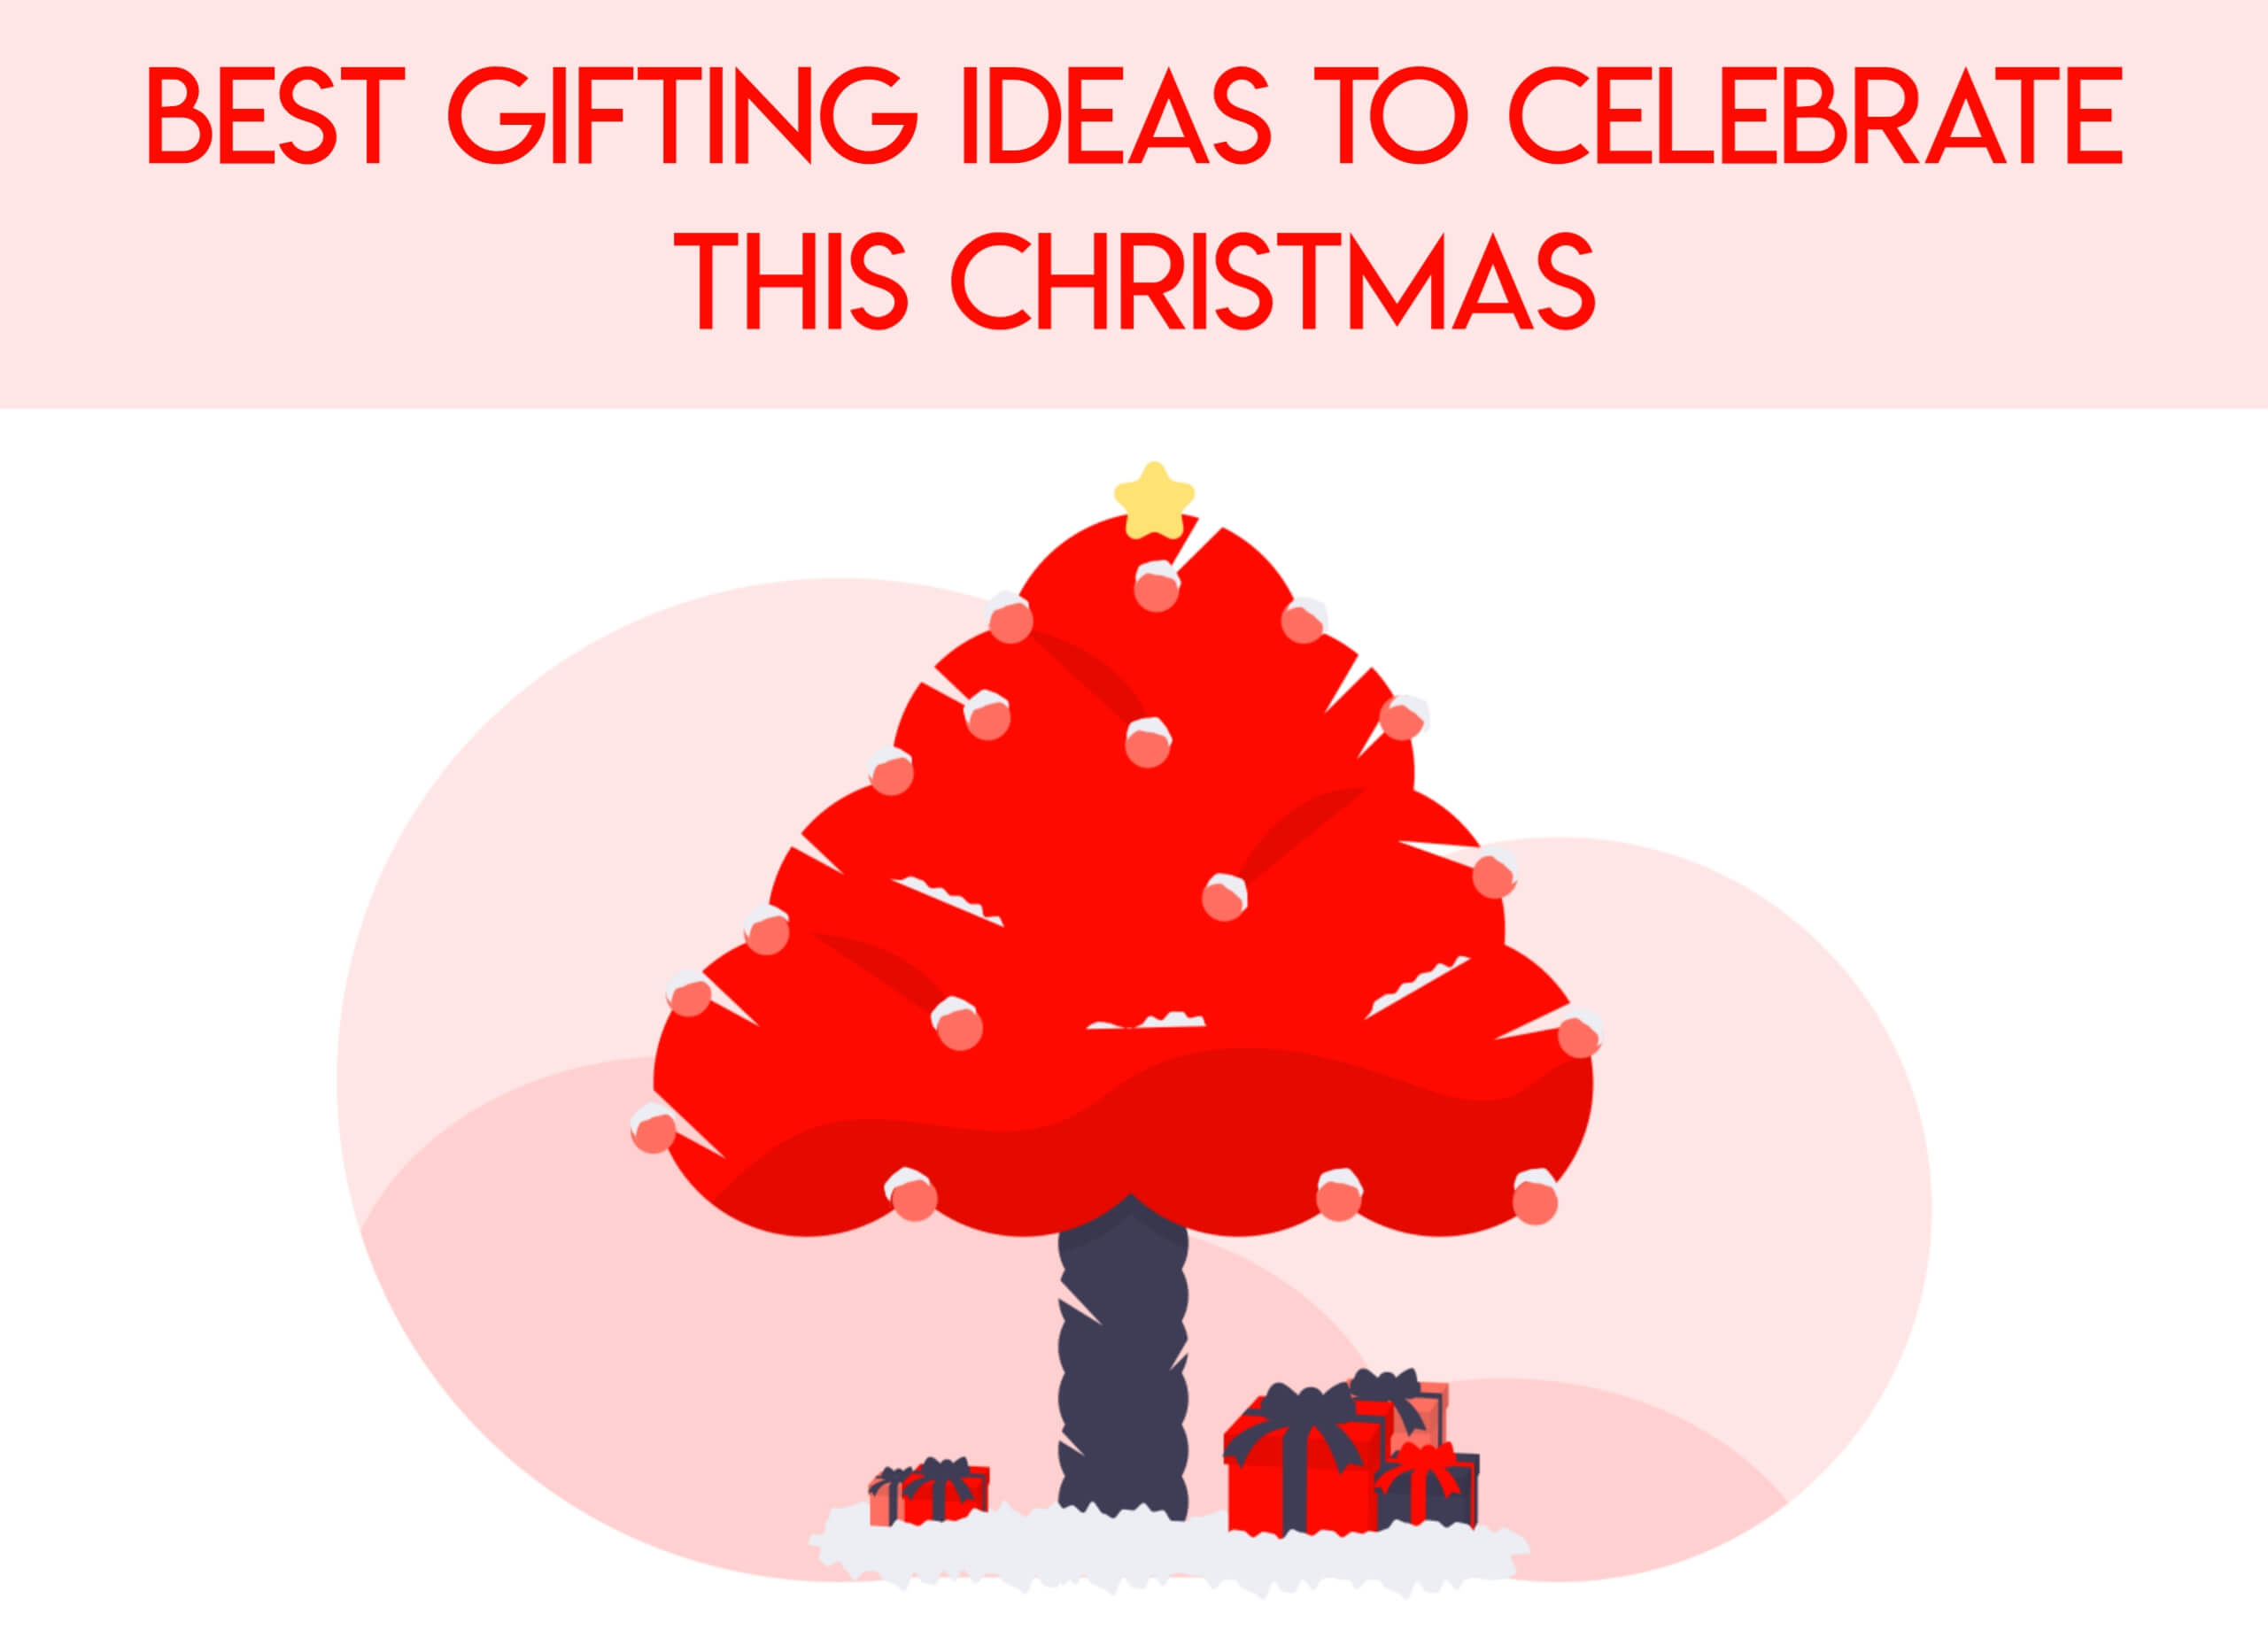 Best Gifting Ideas To Celebrate This Christmas